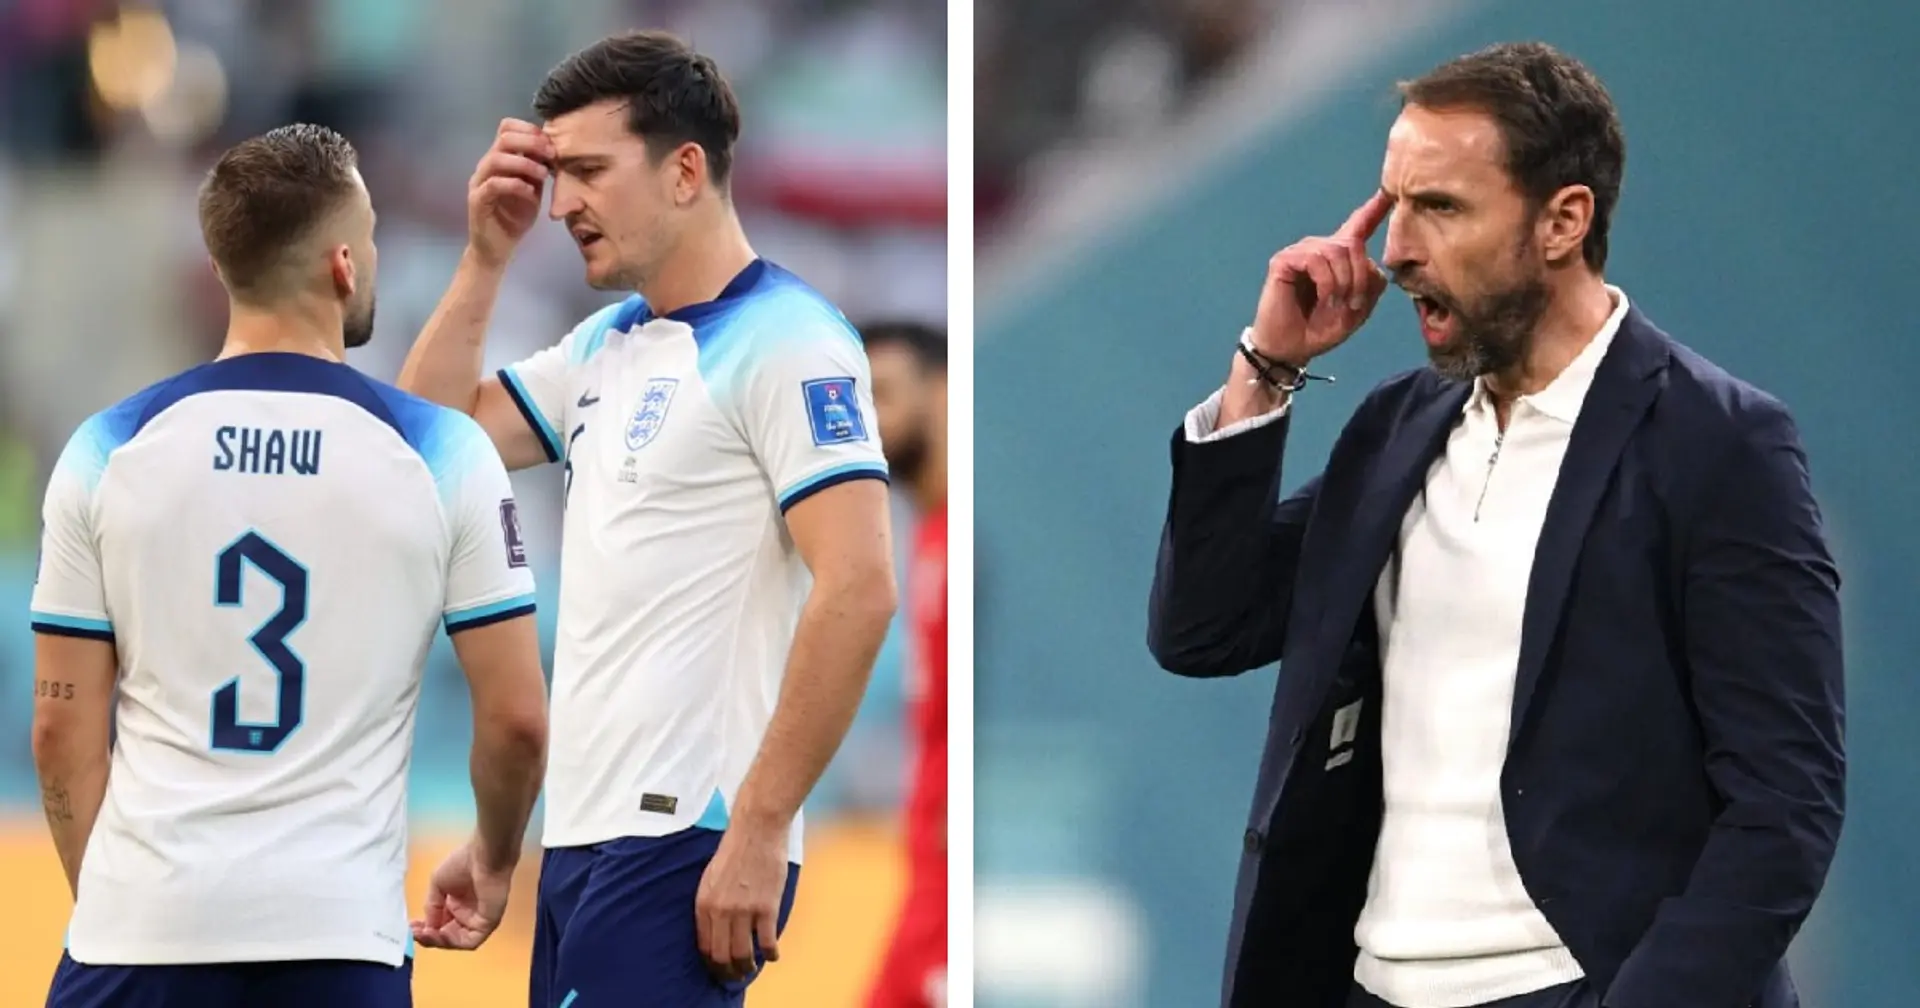 Southgate jokes he's 'fed up' with England in 6-2 win as Maguire, Shaw and Rashford star